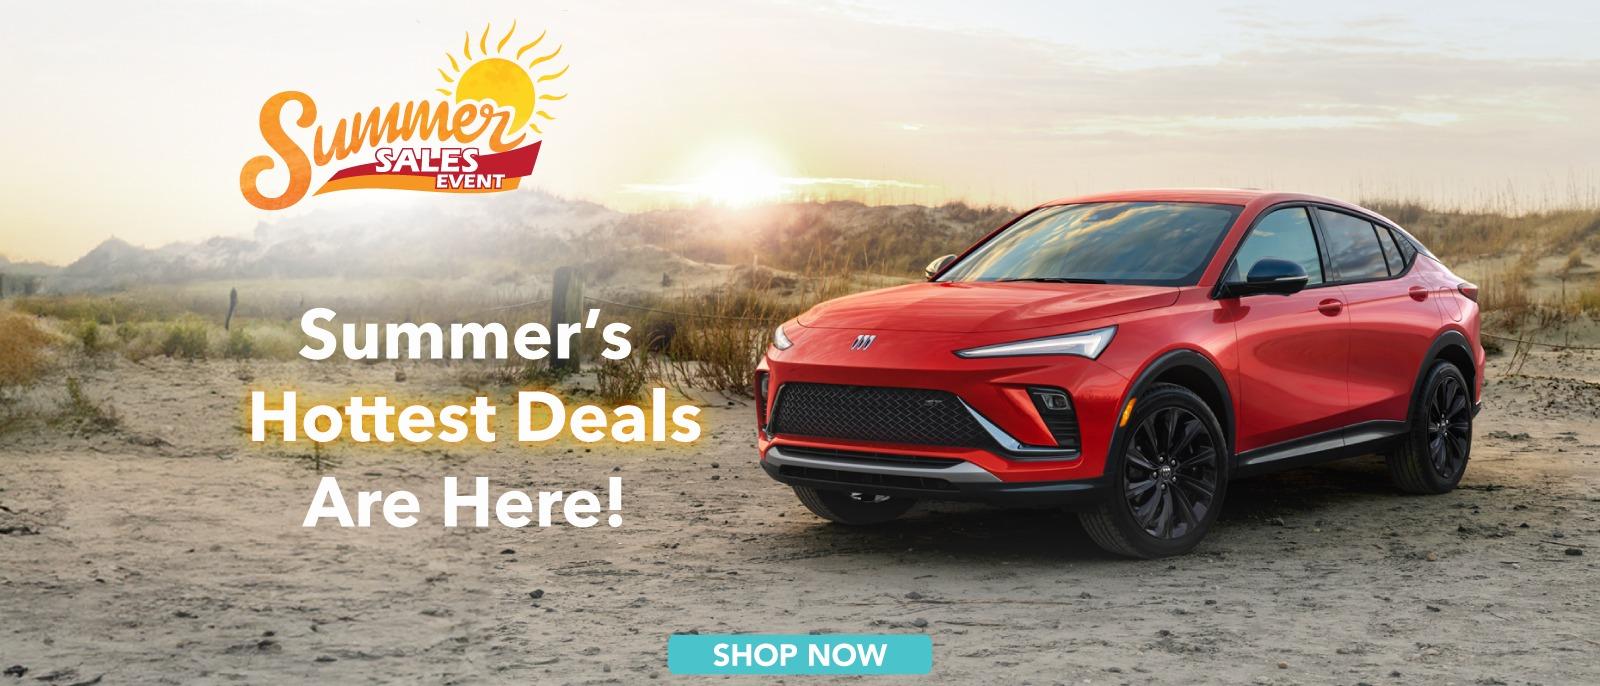 Summer’s Hottest Deals Are Here!